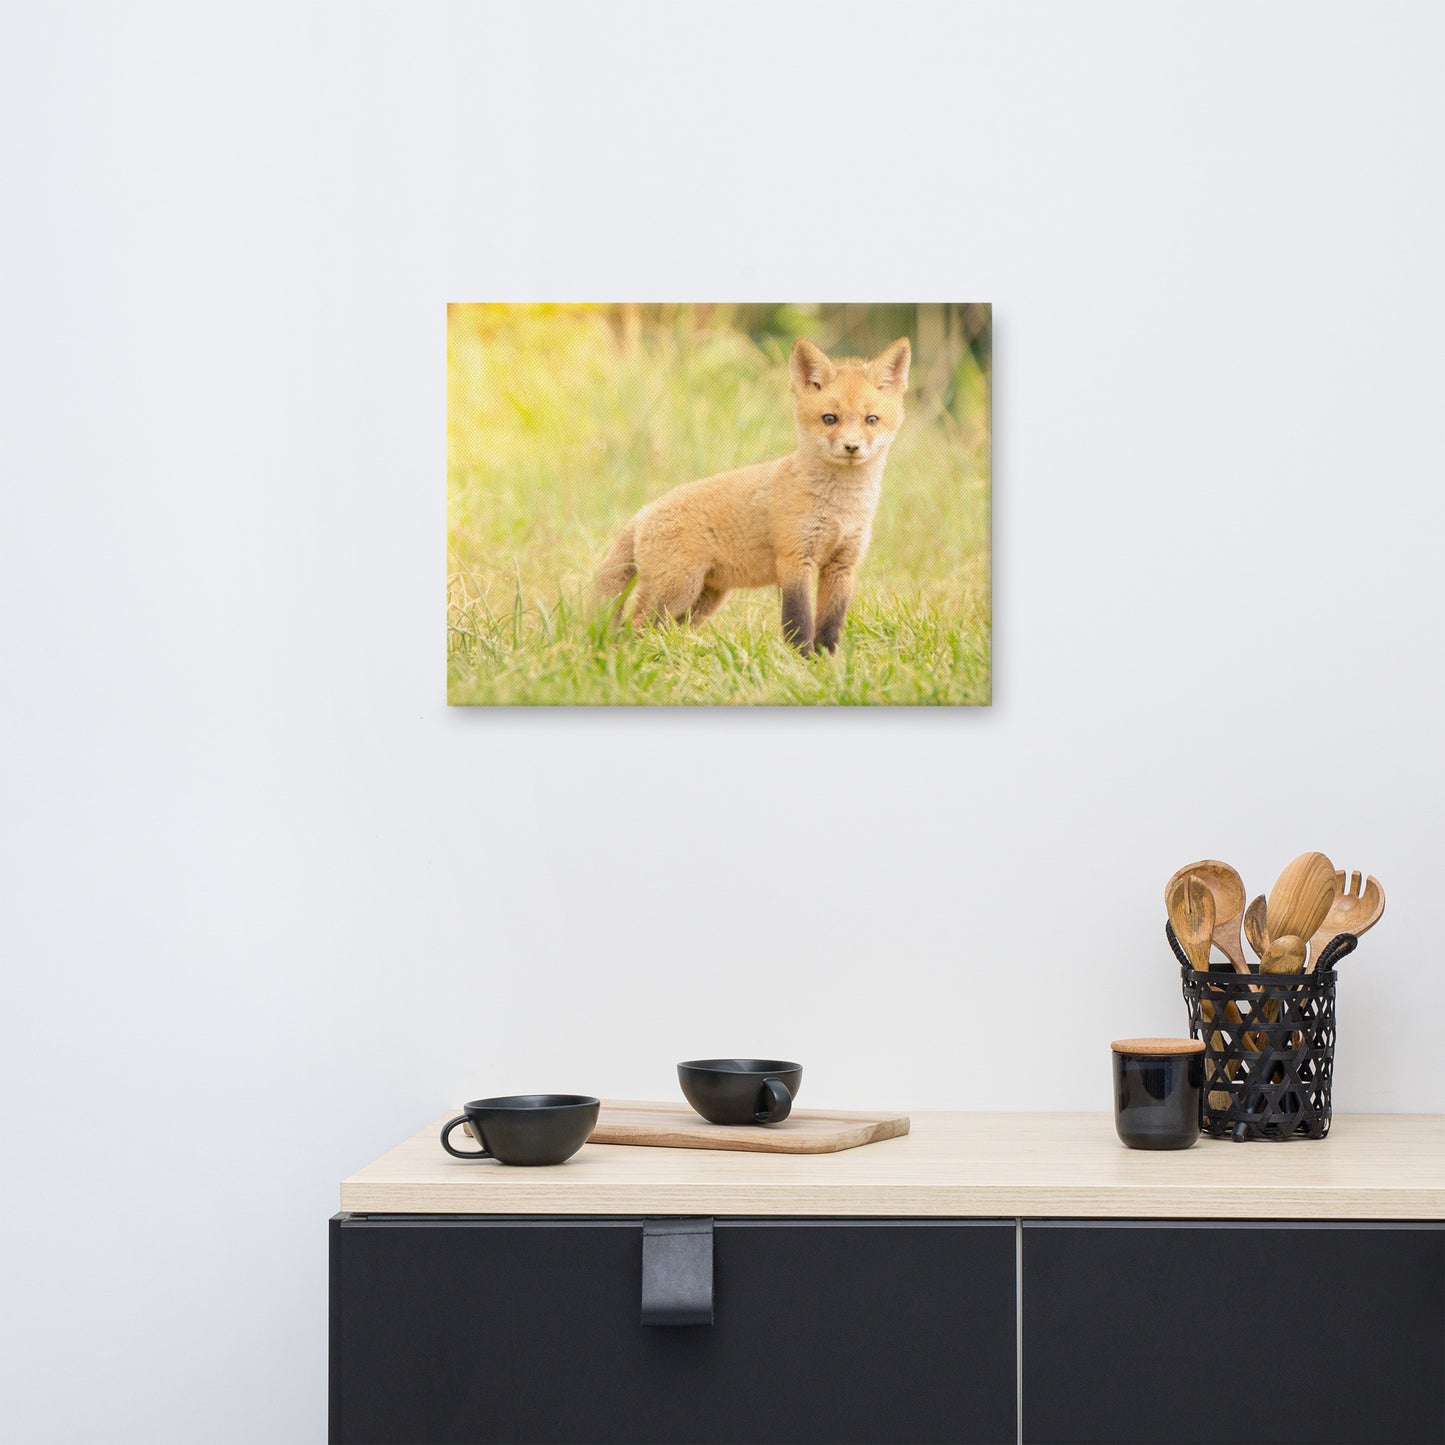 Animal Canvas For Nursery: Baby Red Fox in the Sun Animal / Wildlife / Nature Photograph Canvas Wall Art Print - Artwork